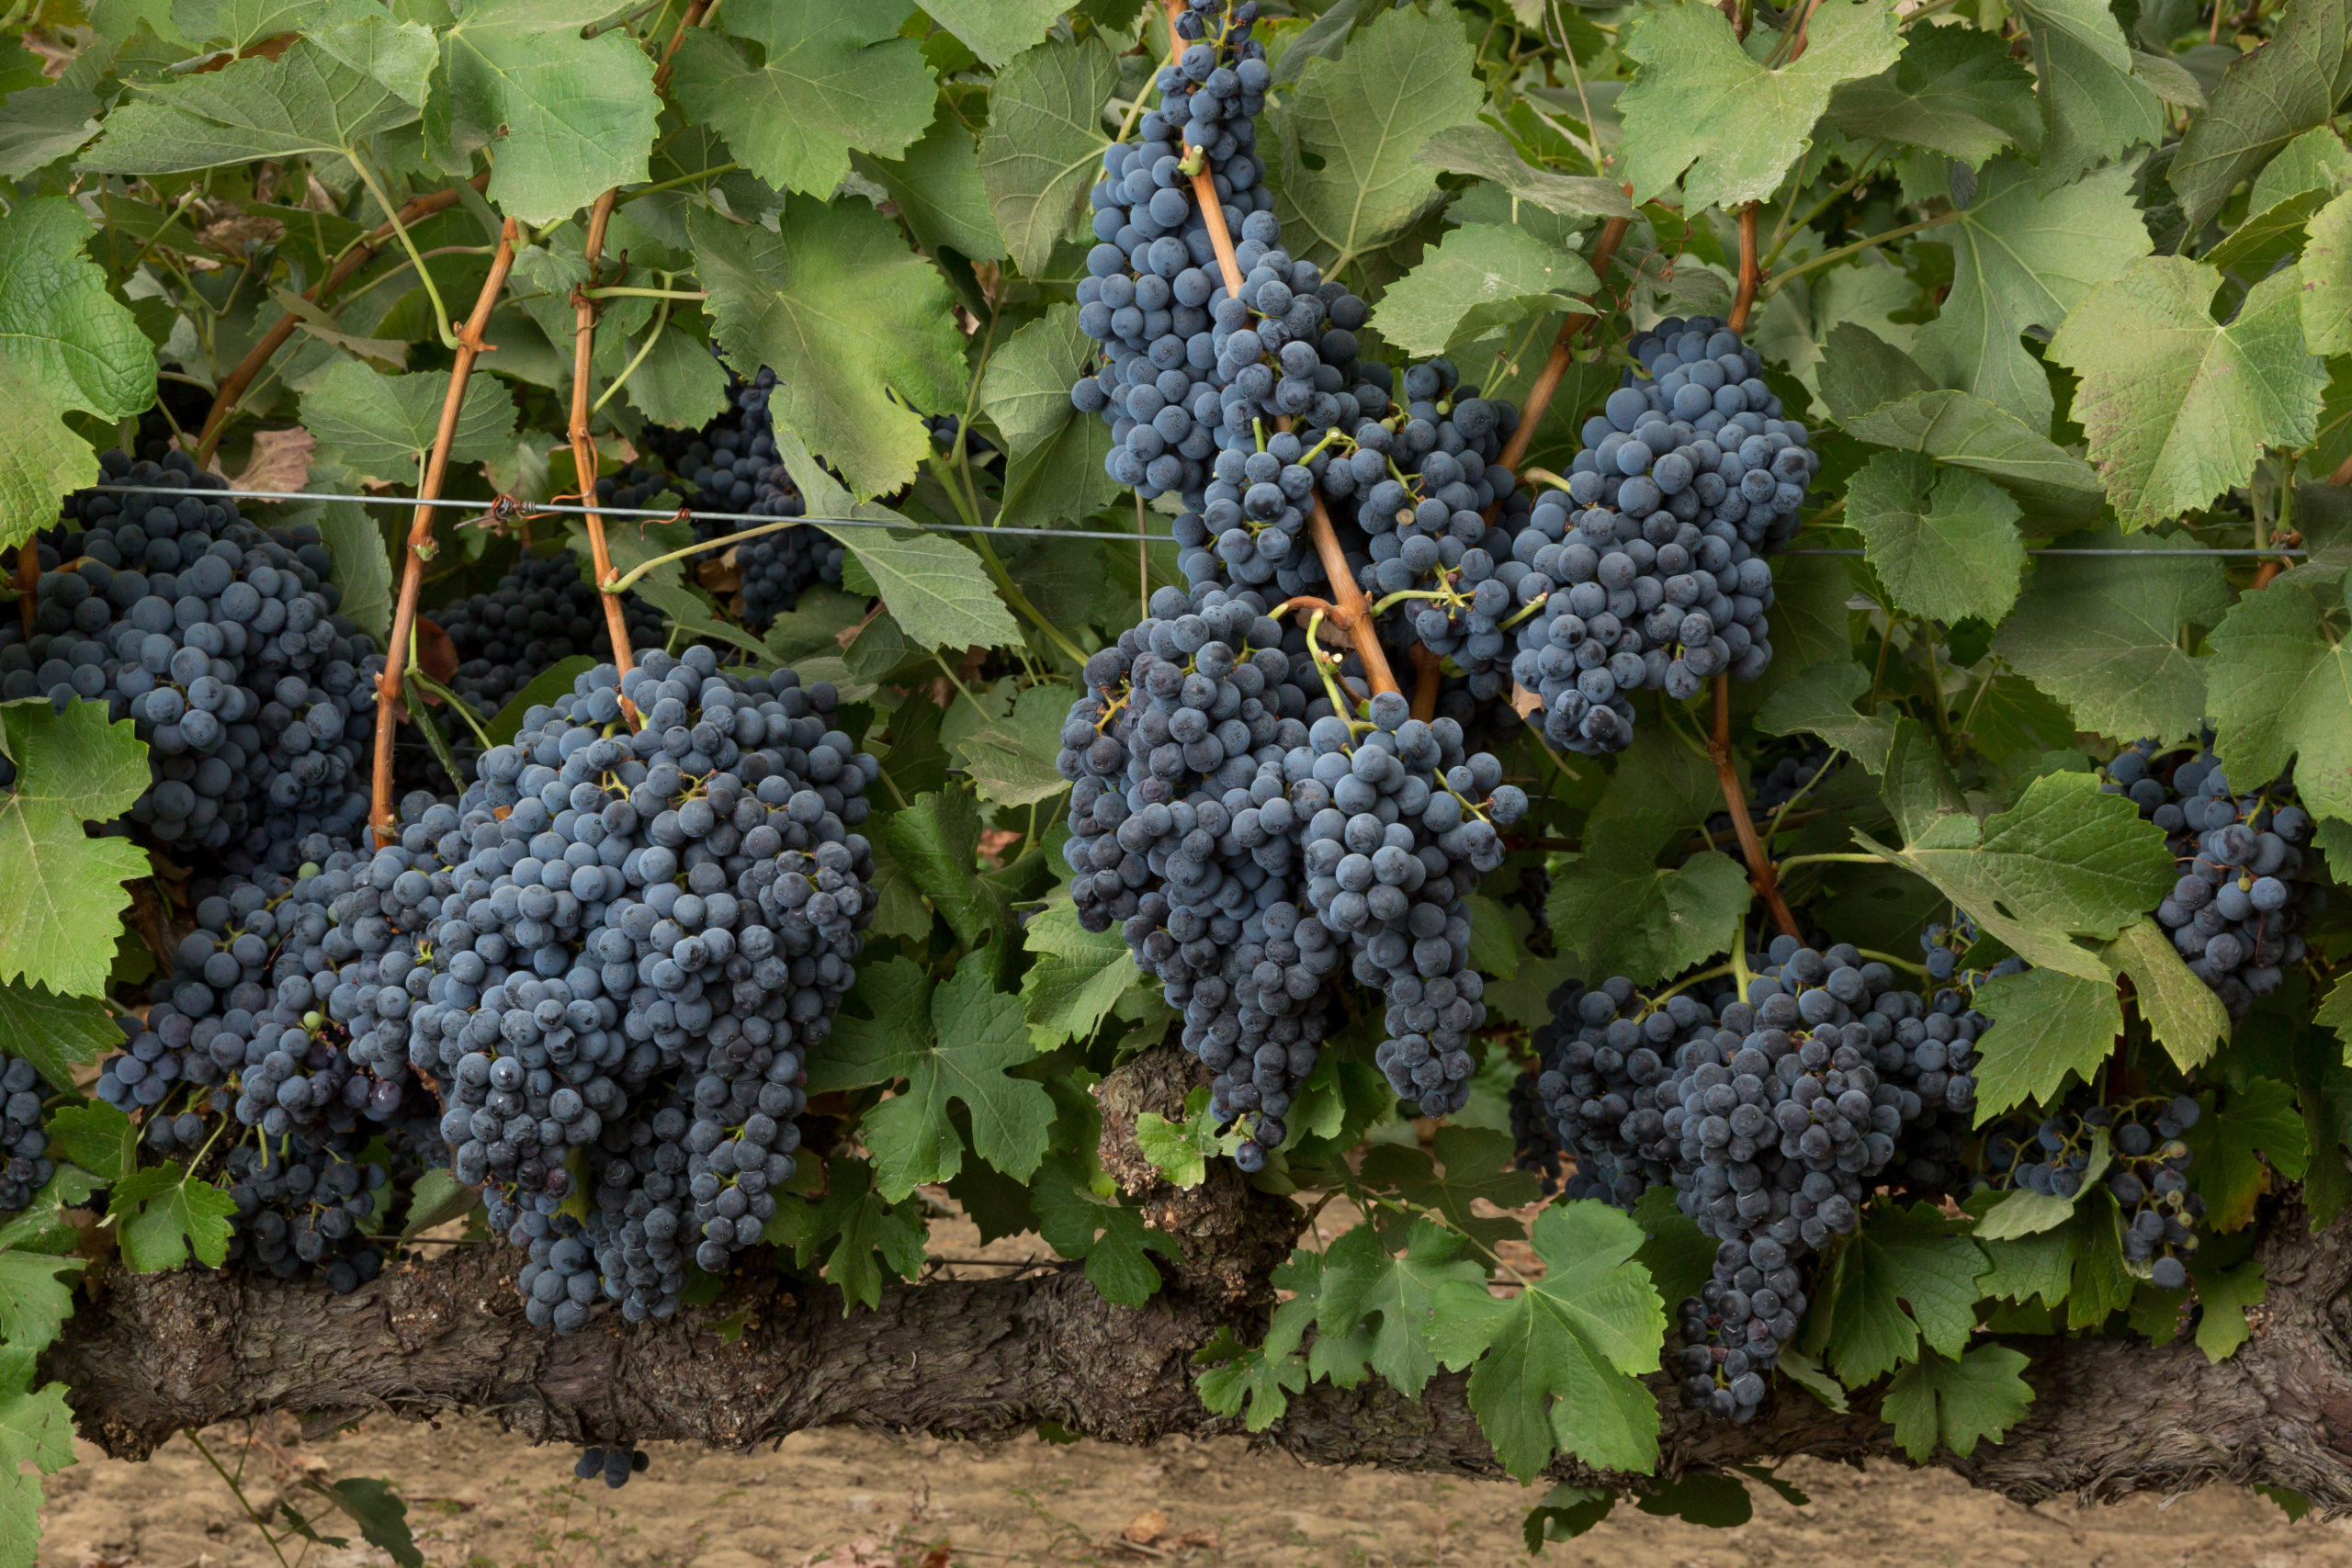 Giant red wine grape clusters adorn vines with giant leaves from the Grand Noir wine